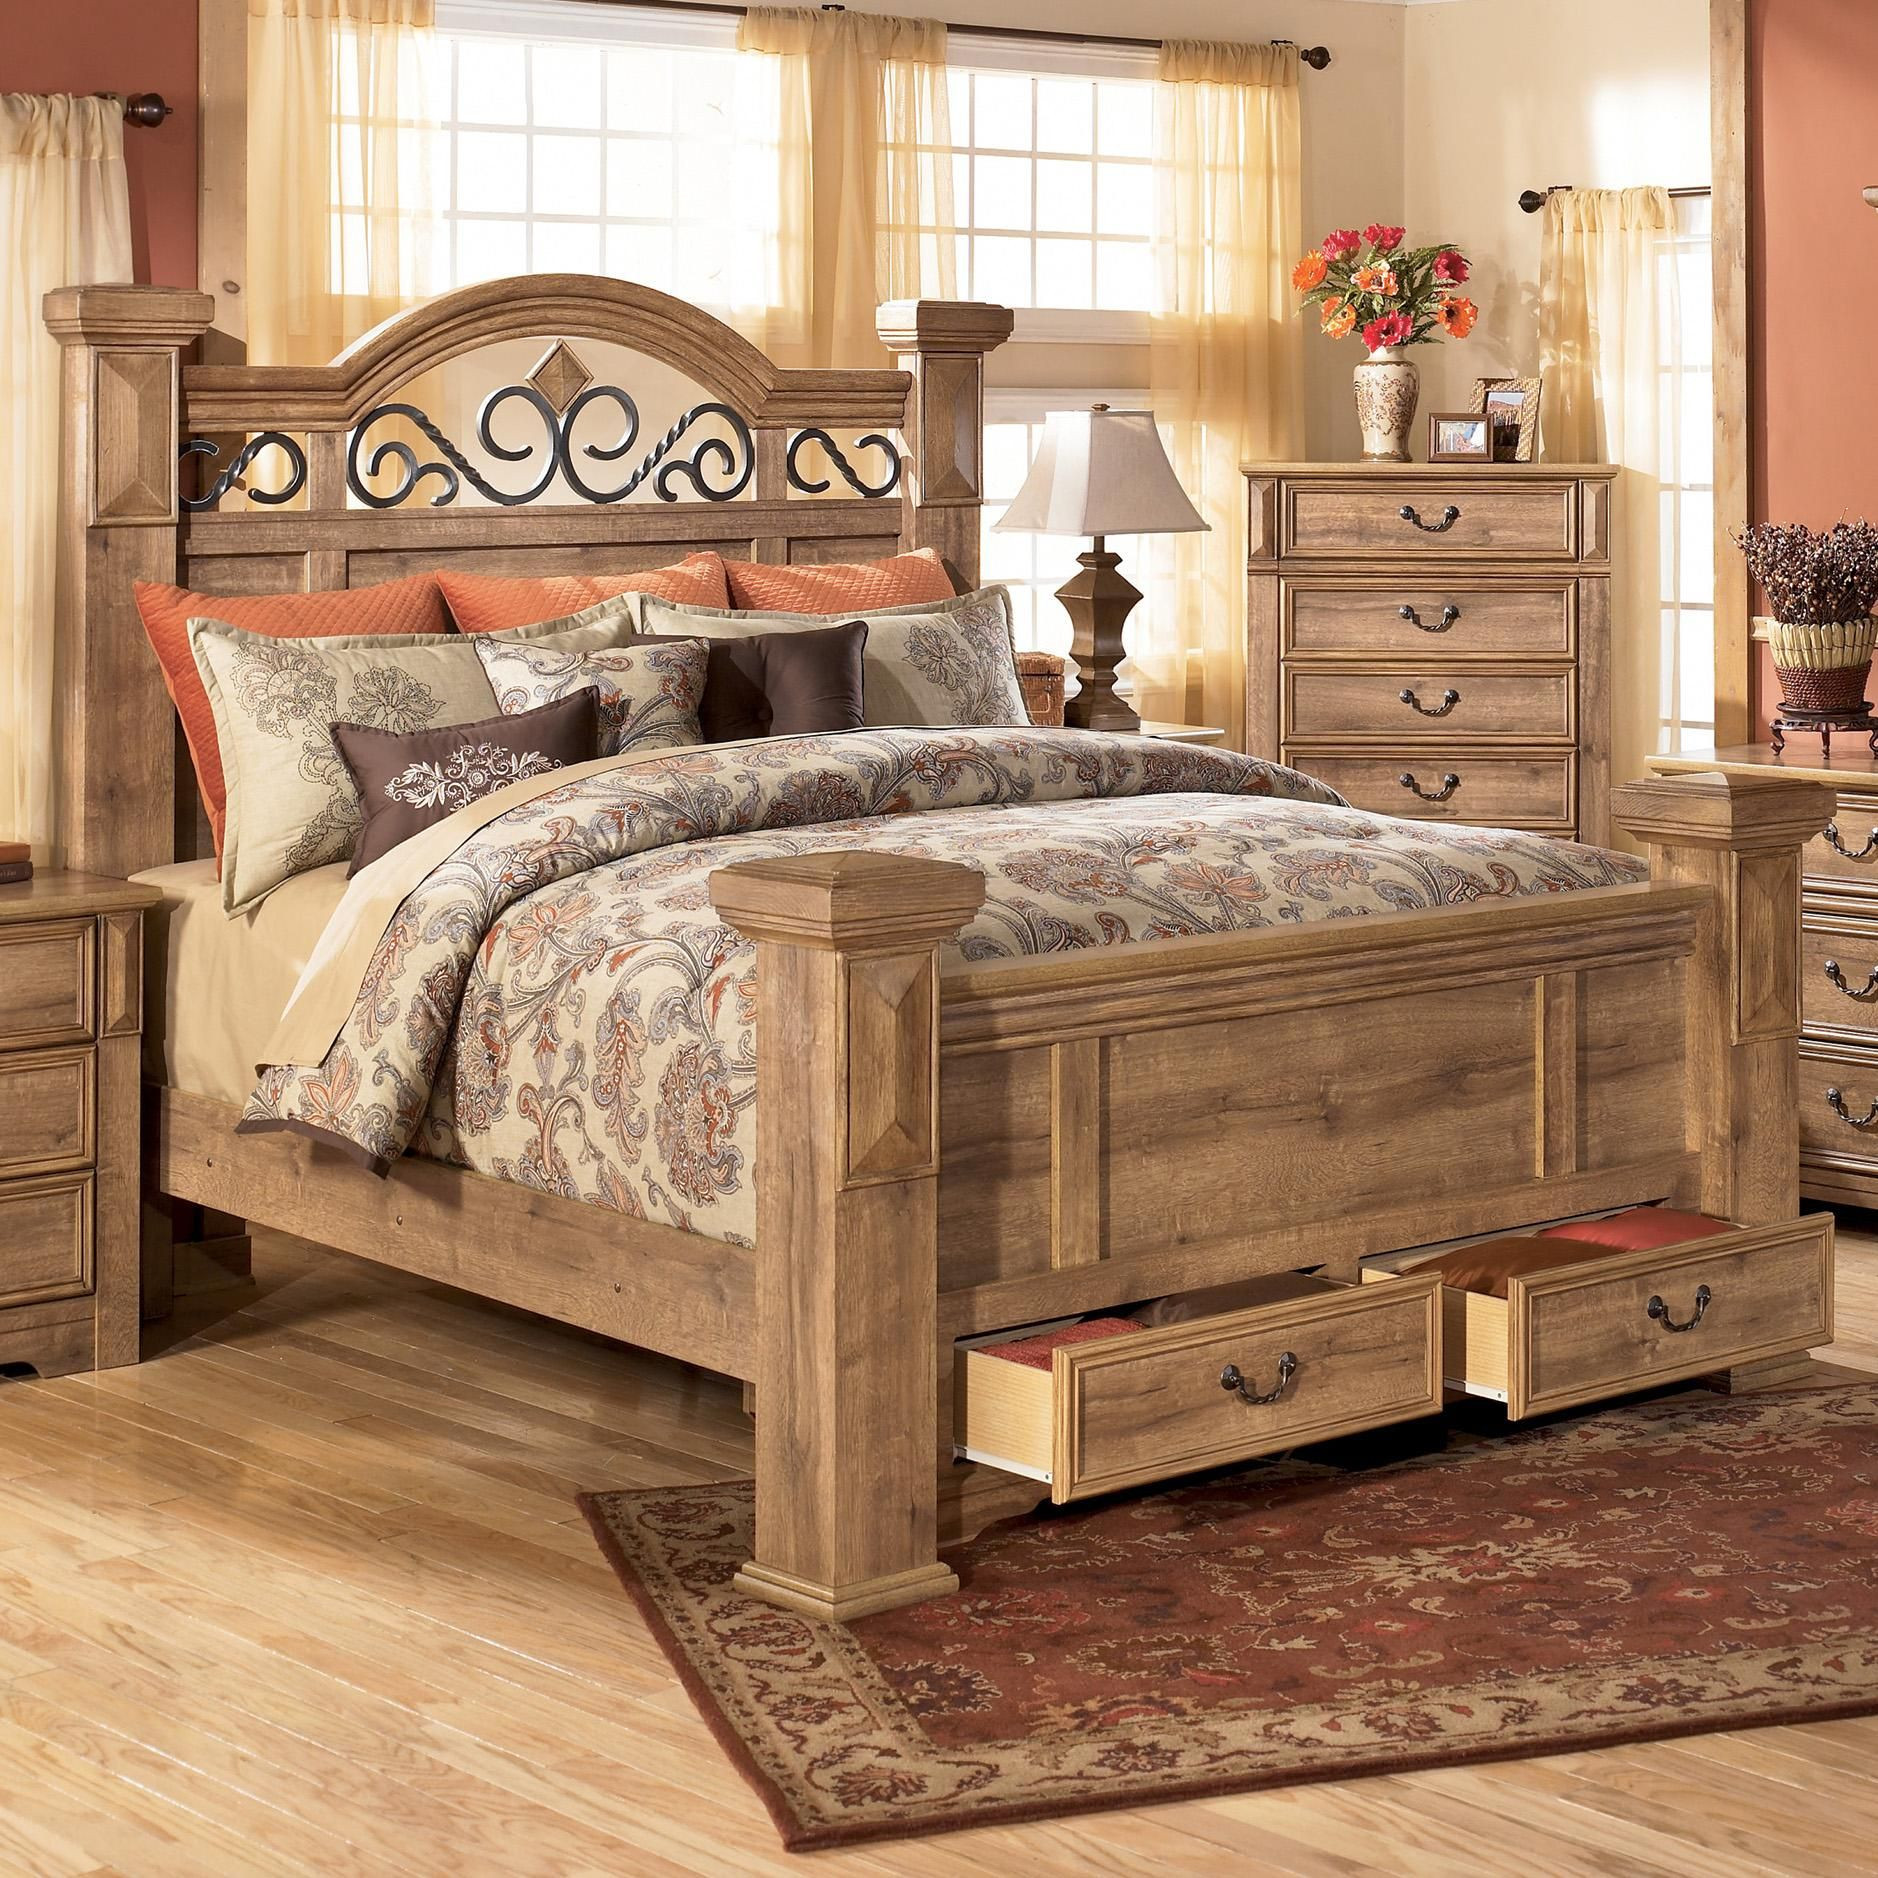 30 Fancy Rustic King Size Bedroom Sets - Home, Decoration, Style and Art Ideas